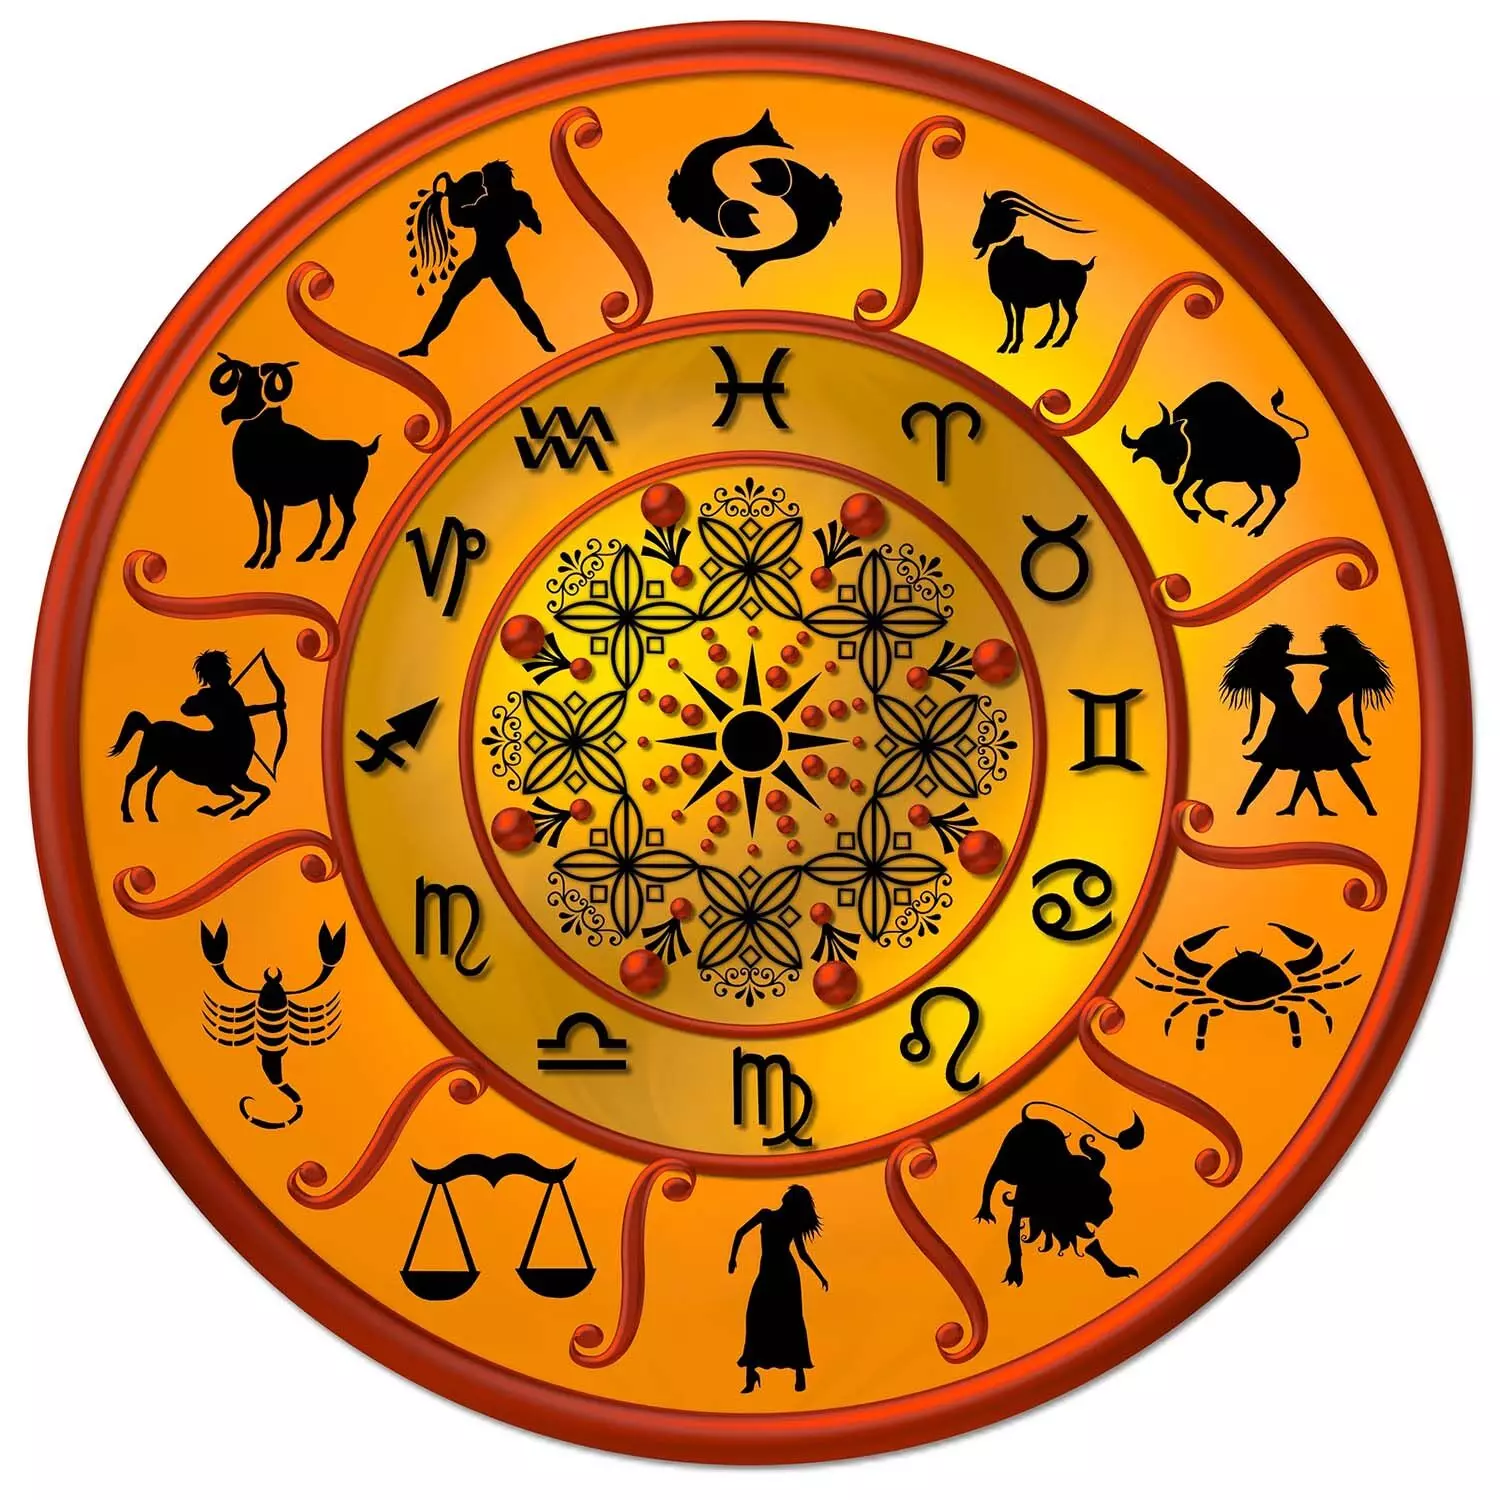 23 June – Know your todays horoscope